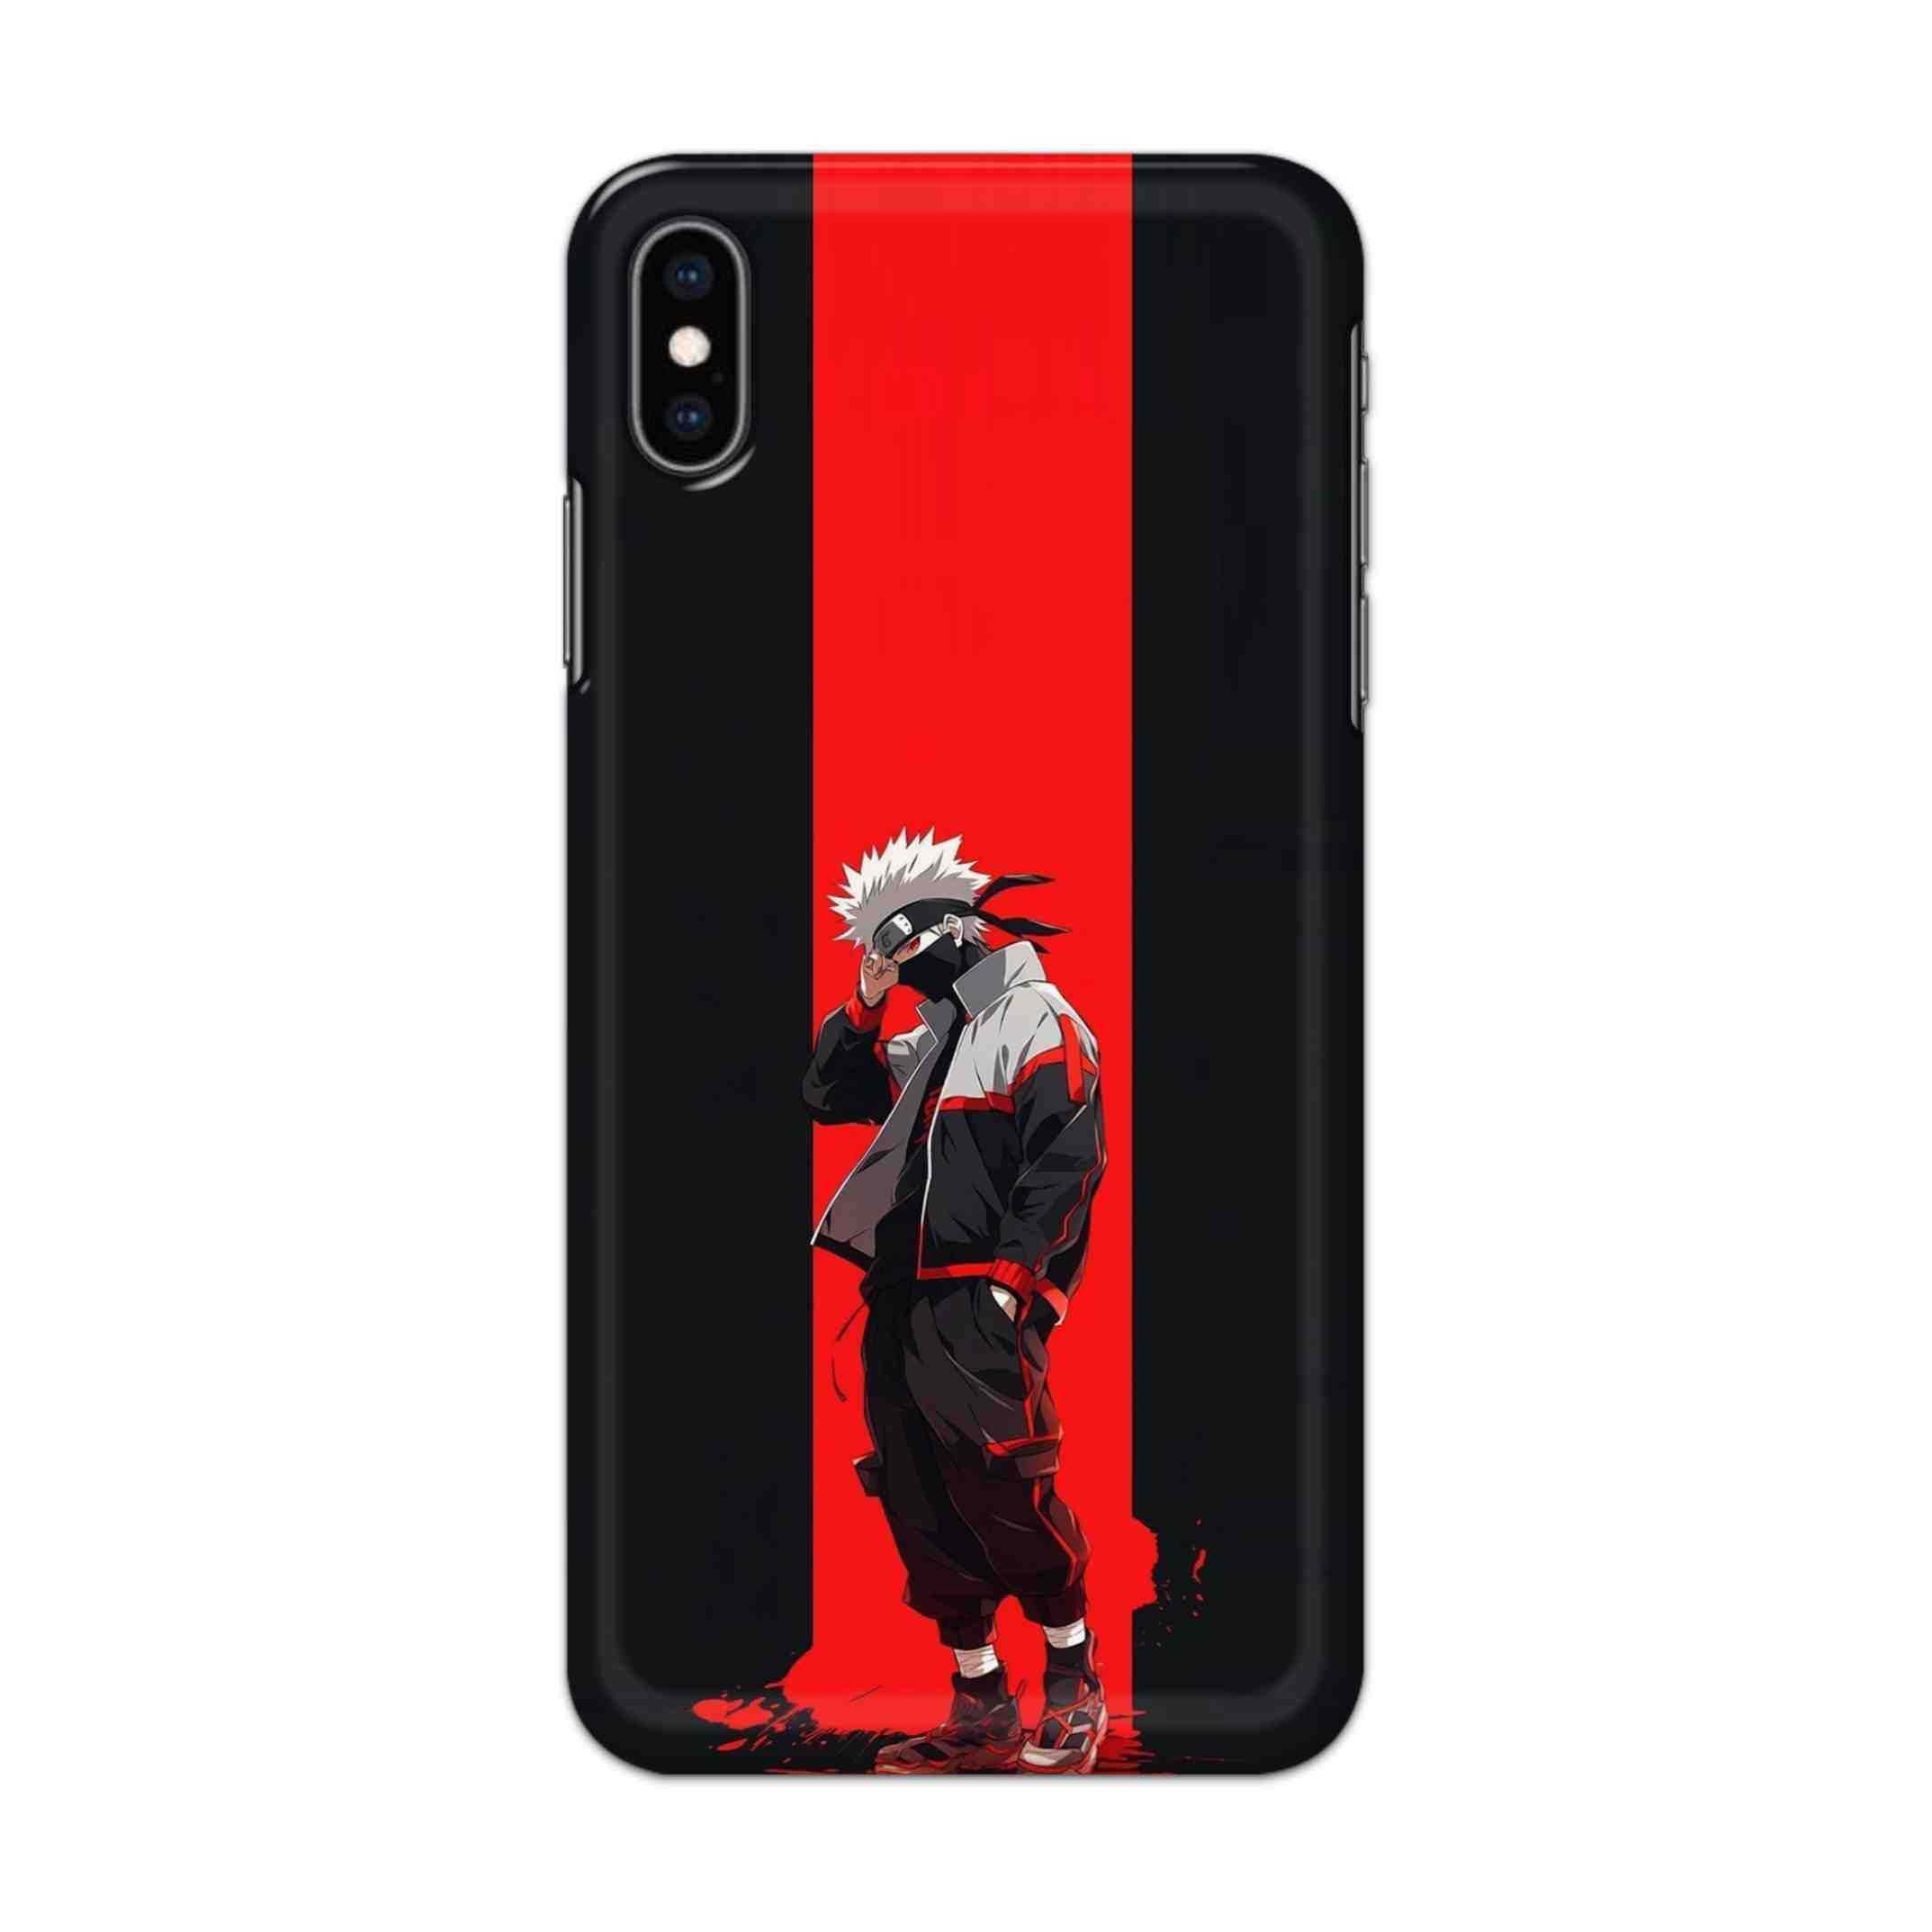 Buy Steins Hard Back Mobile Phone Case/Cover For iPhone XS MAX Online